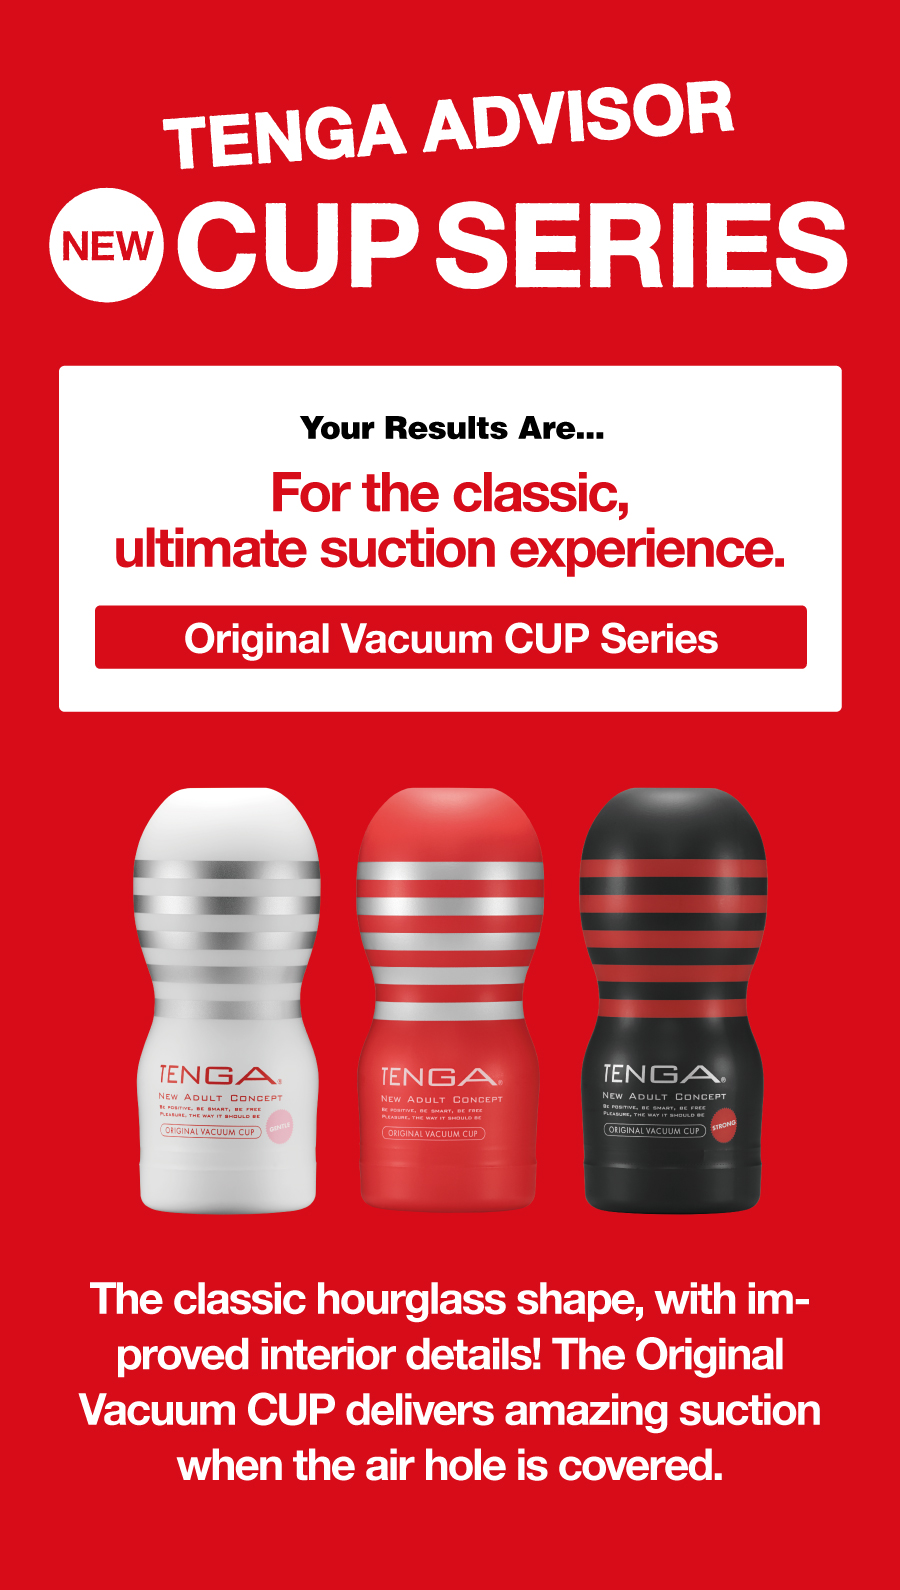 TENGA ADVISOR NEW CUP SERIES Your Results Are... For the classic,ultimate suction experience. Original Vacuum CUP Series The classic hourglass shape, with improved interior details! The Original Vacuum CUP delivers amazing suction when the air hole is covered.